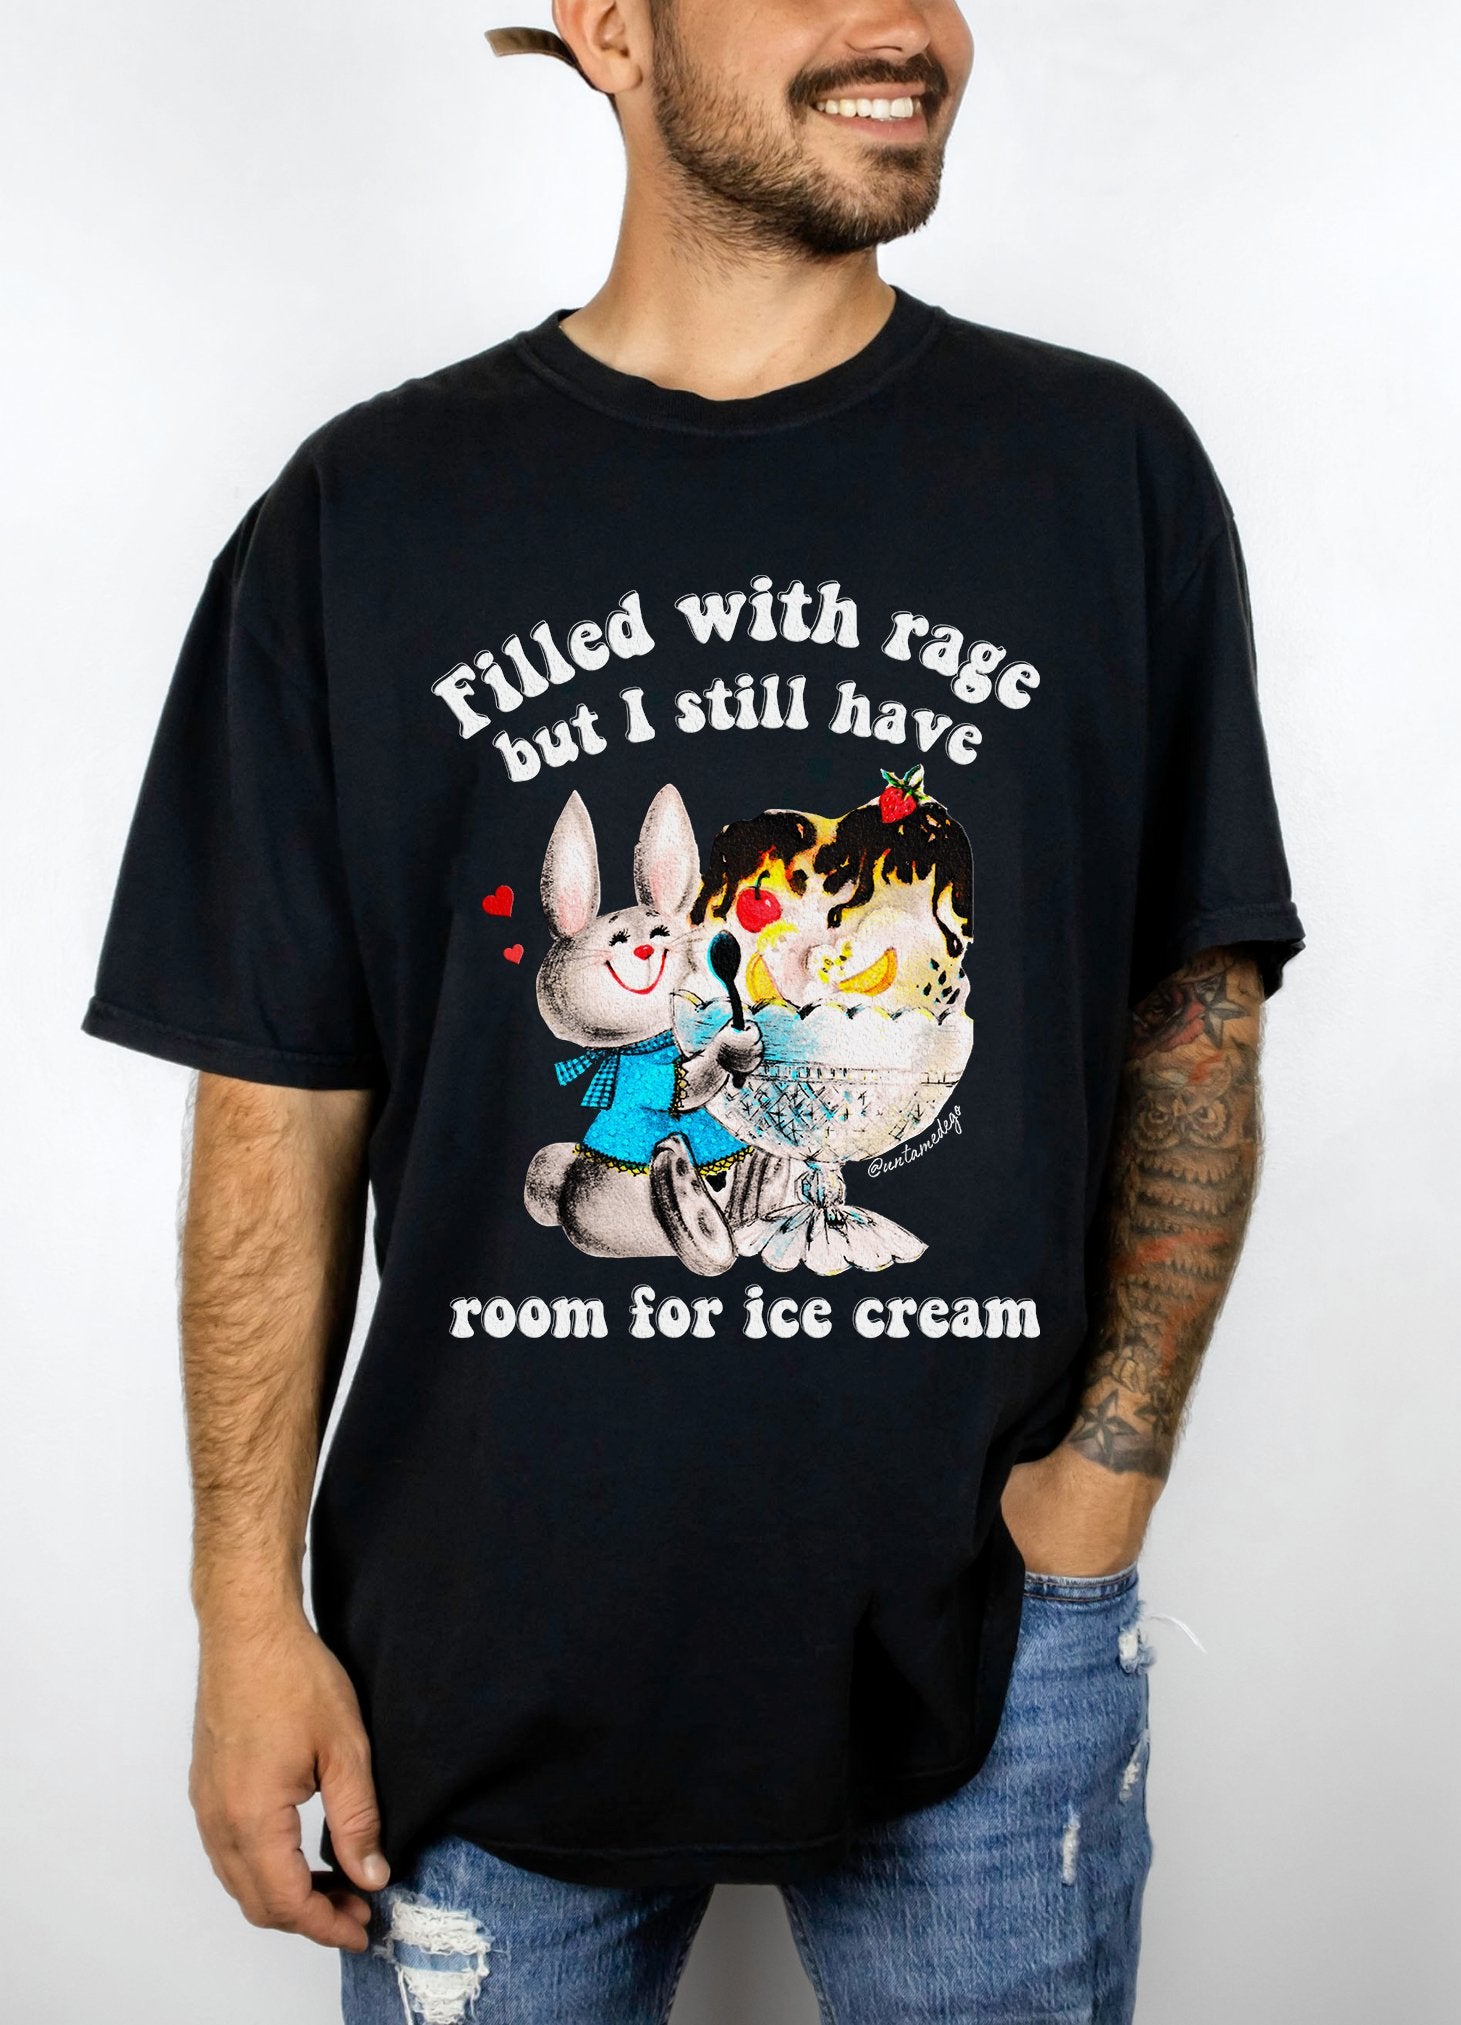 Filled With Rage But I Still Have Room For Ice Cream Mens Tee - UntamedEgo LLC.